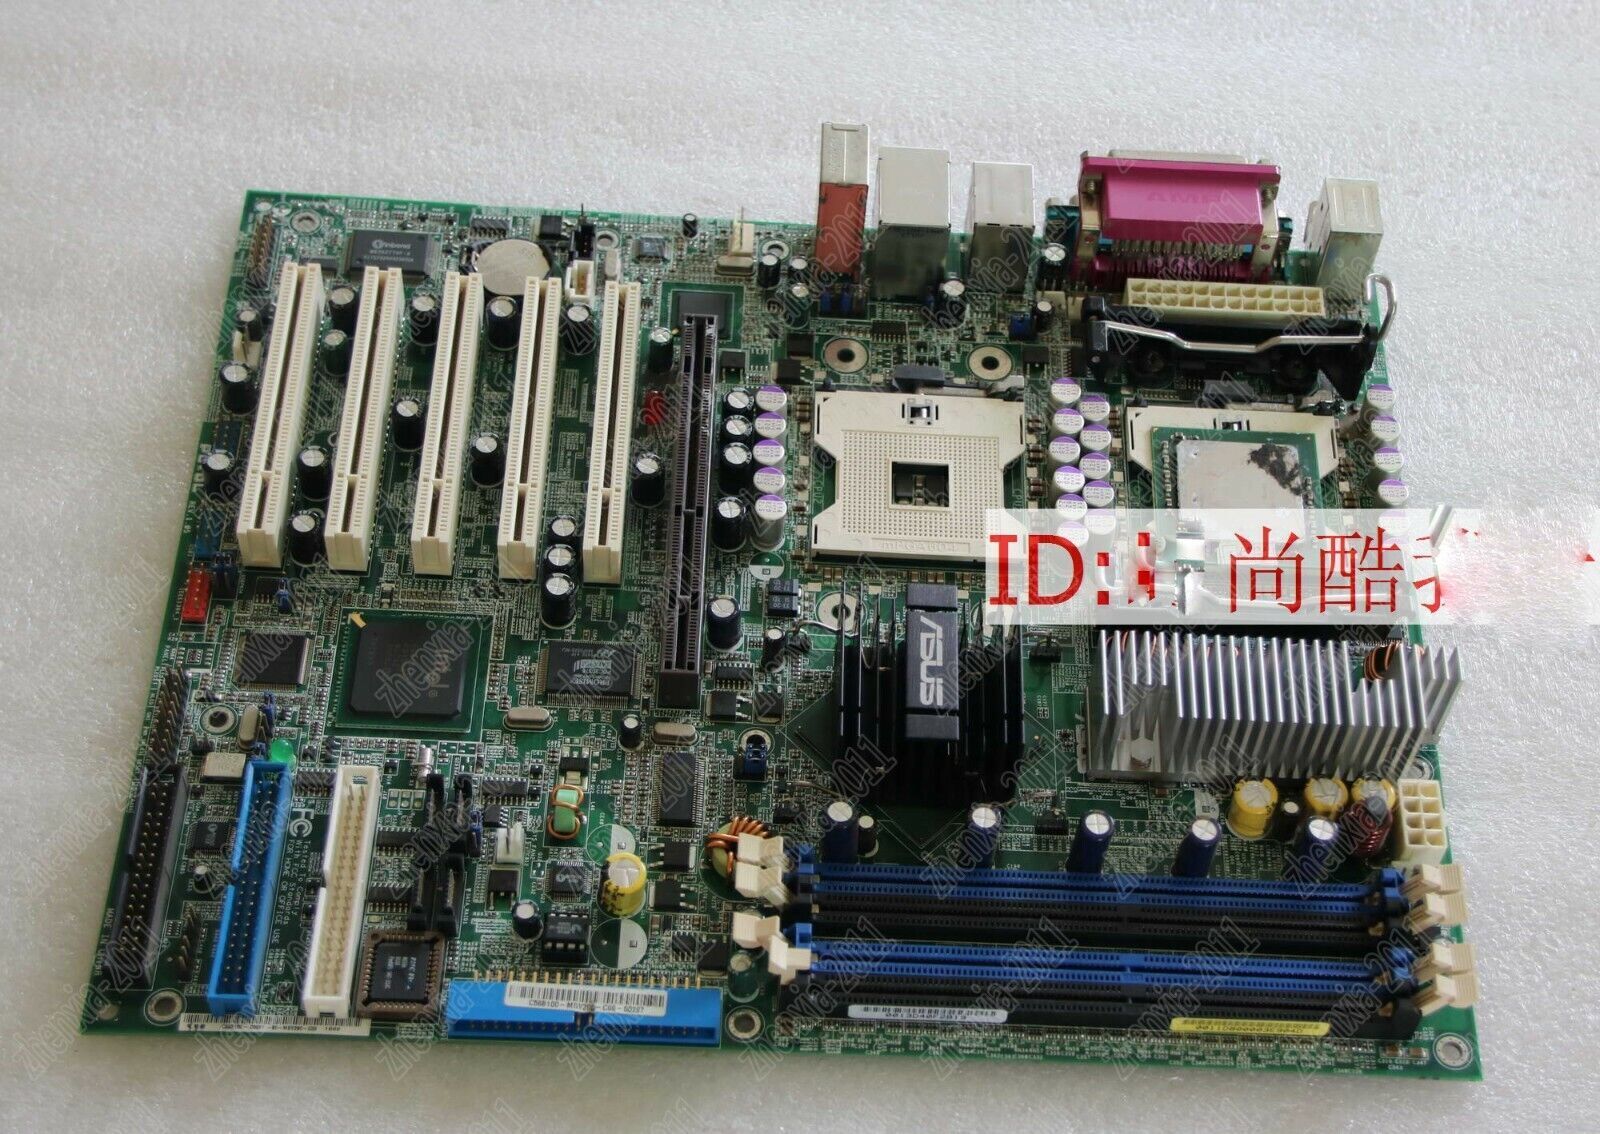 1PC Used PC-DL DELUXE 875P Motherboard 604 Pin Server Board PC-DL #A6-8